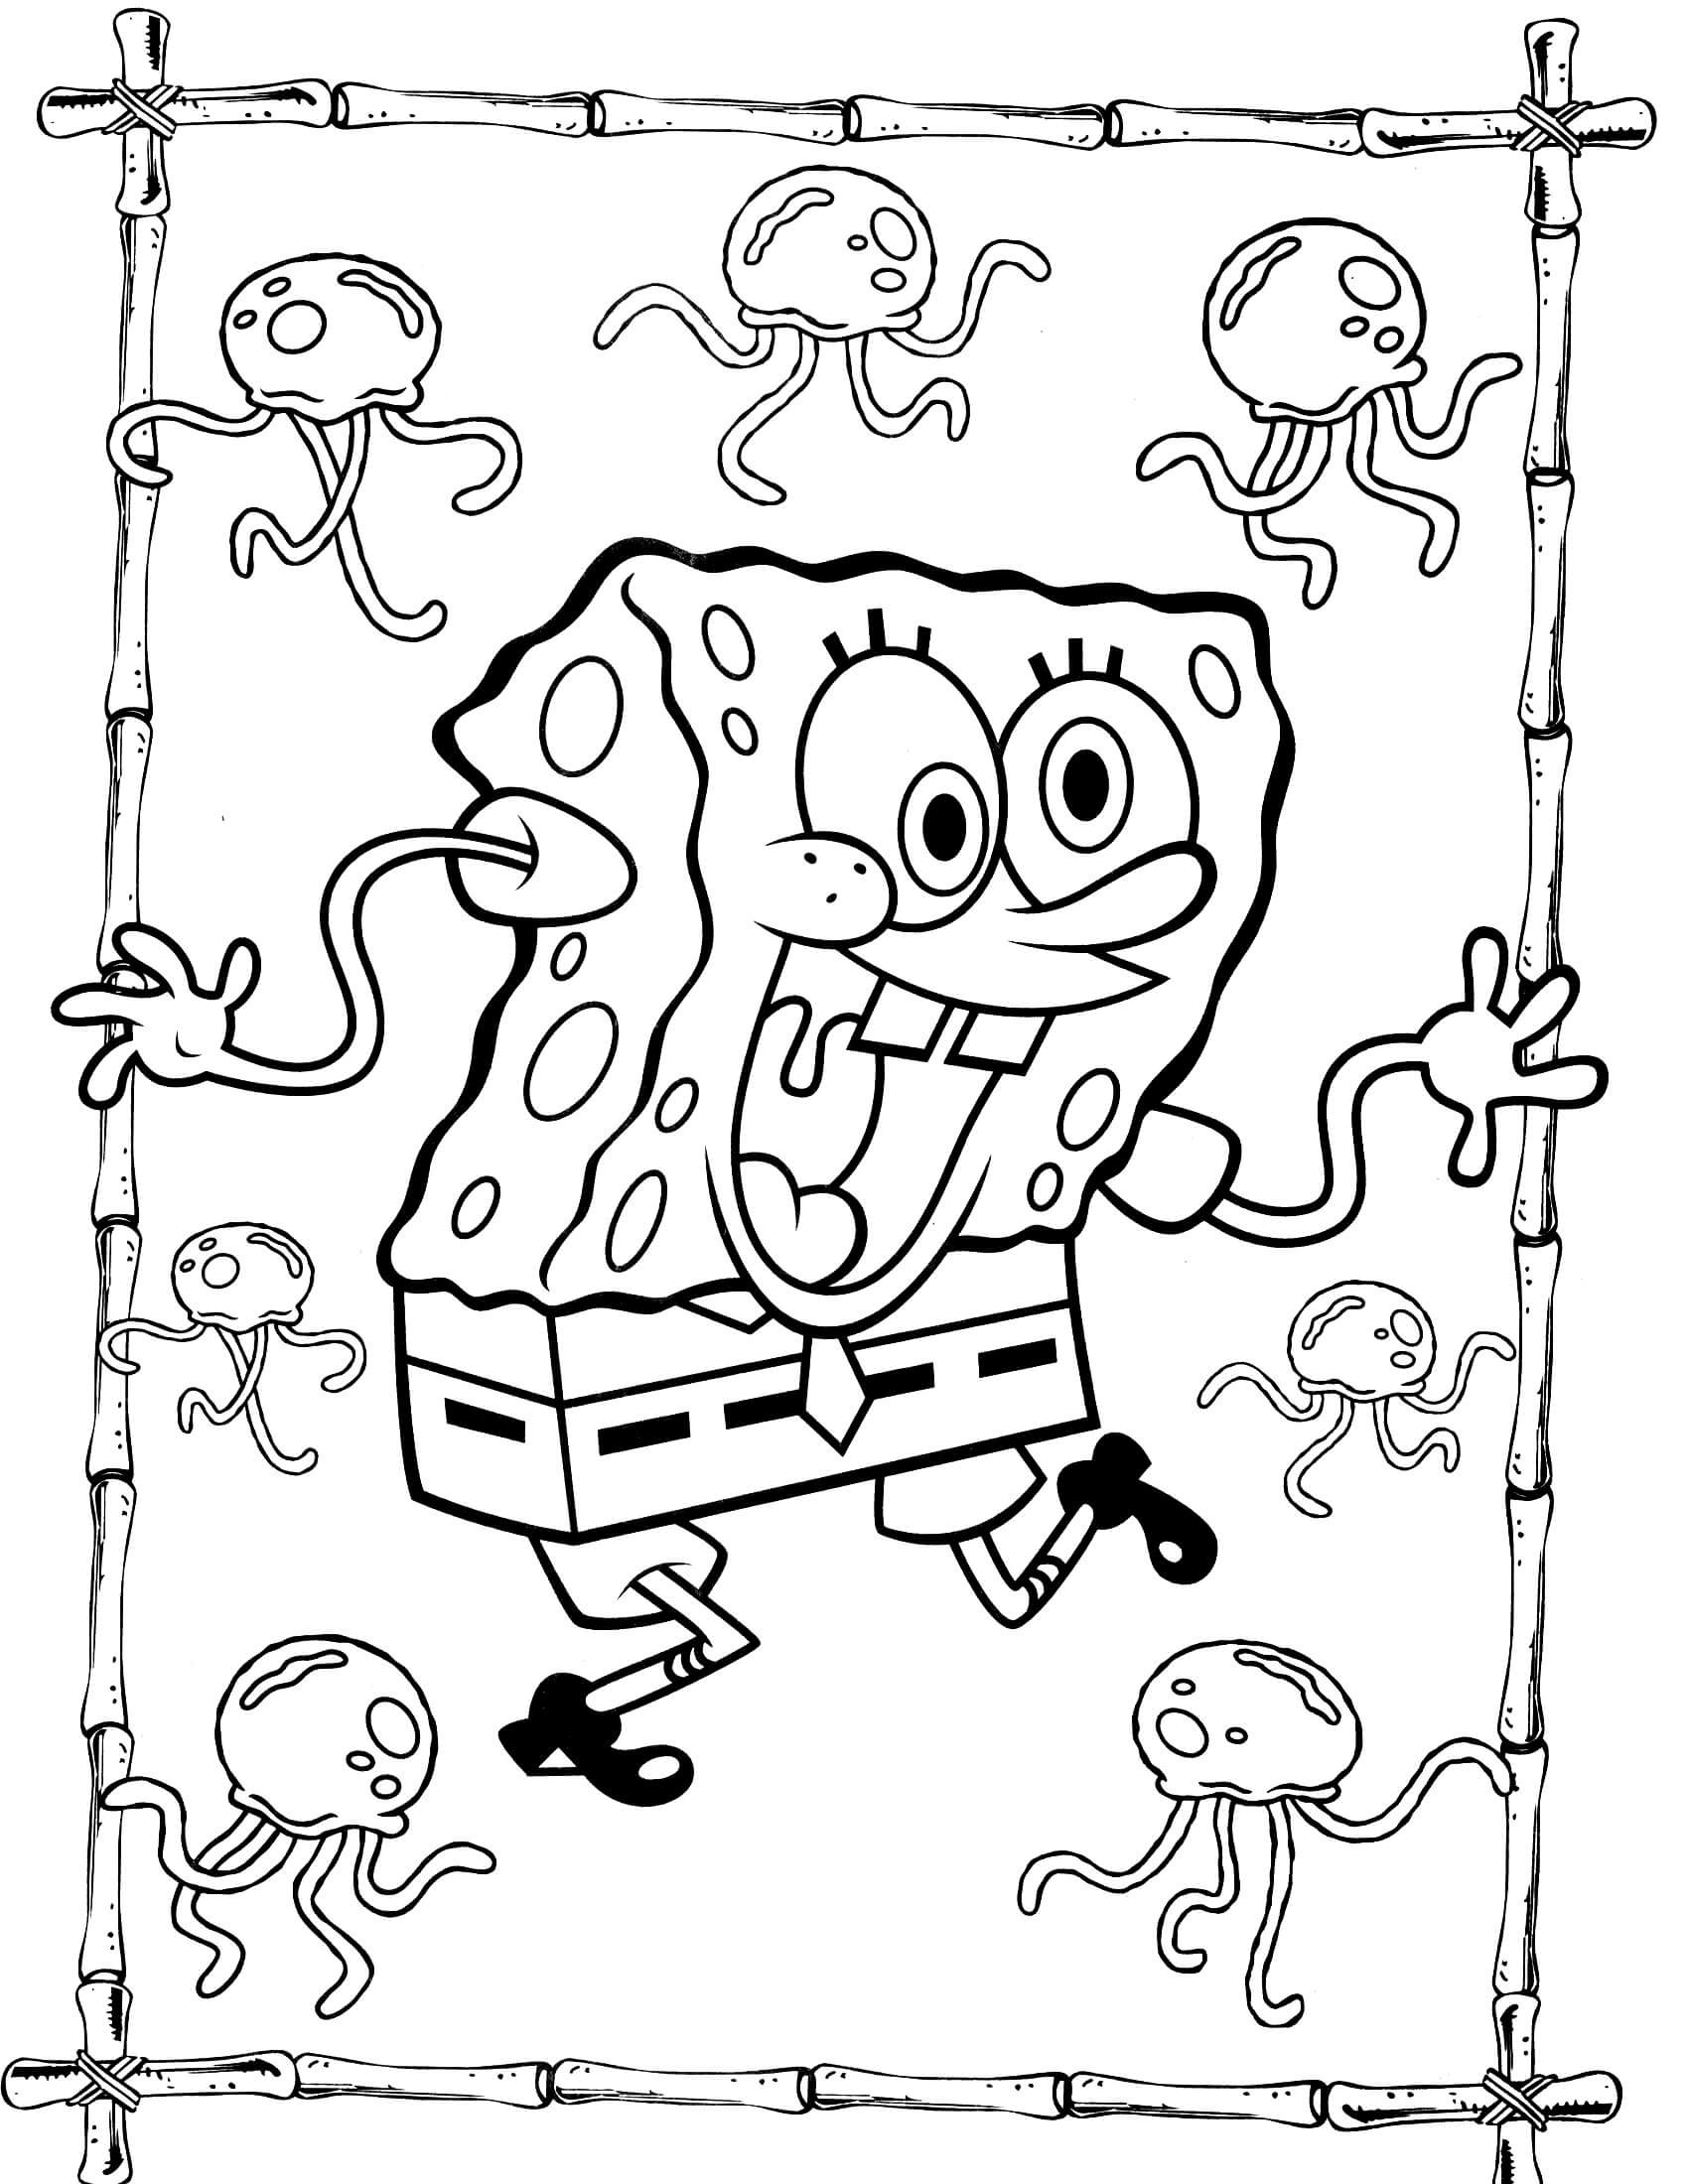 Spongebob Coloring Pages For Boys
 1000 images about IColor "Little Boys Colorbook " on